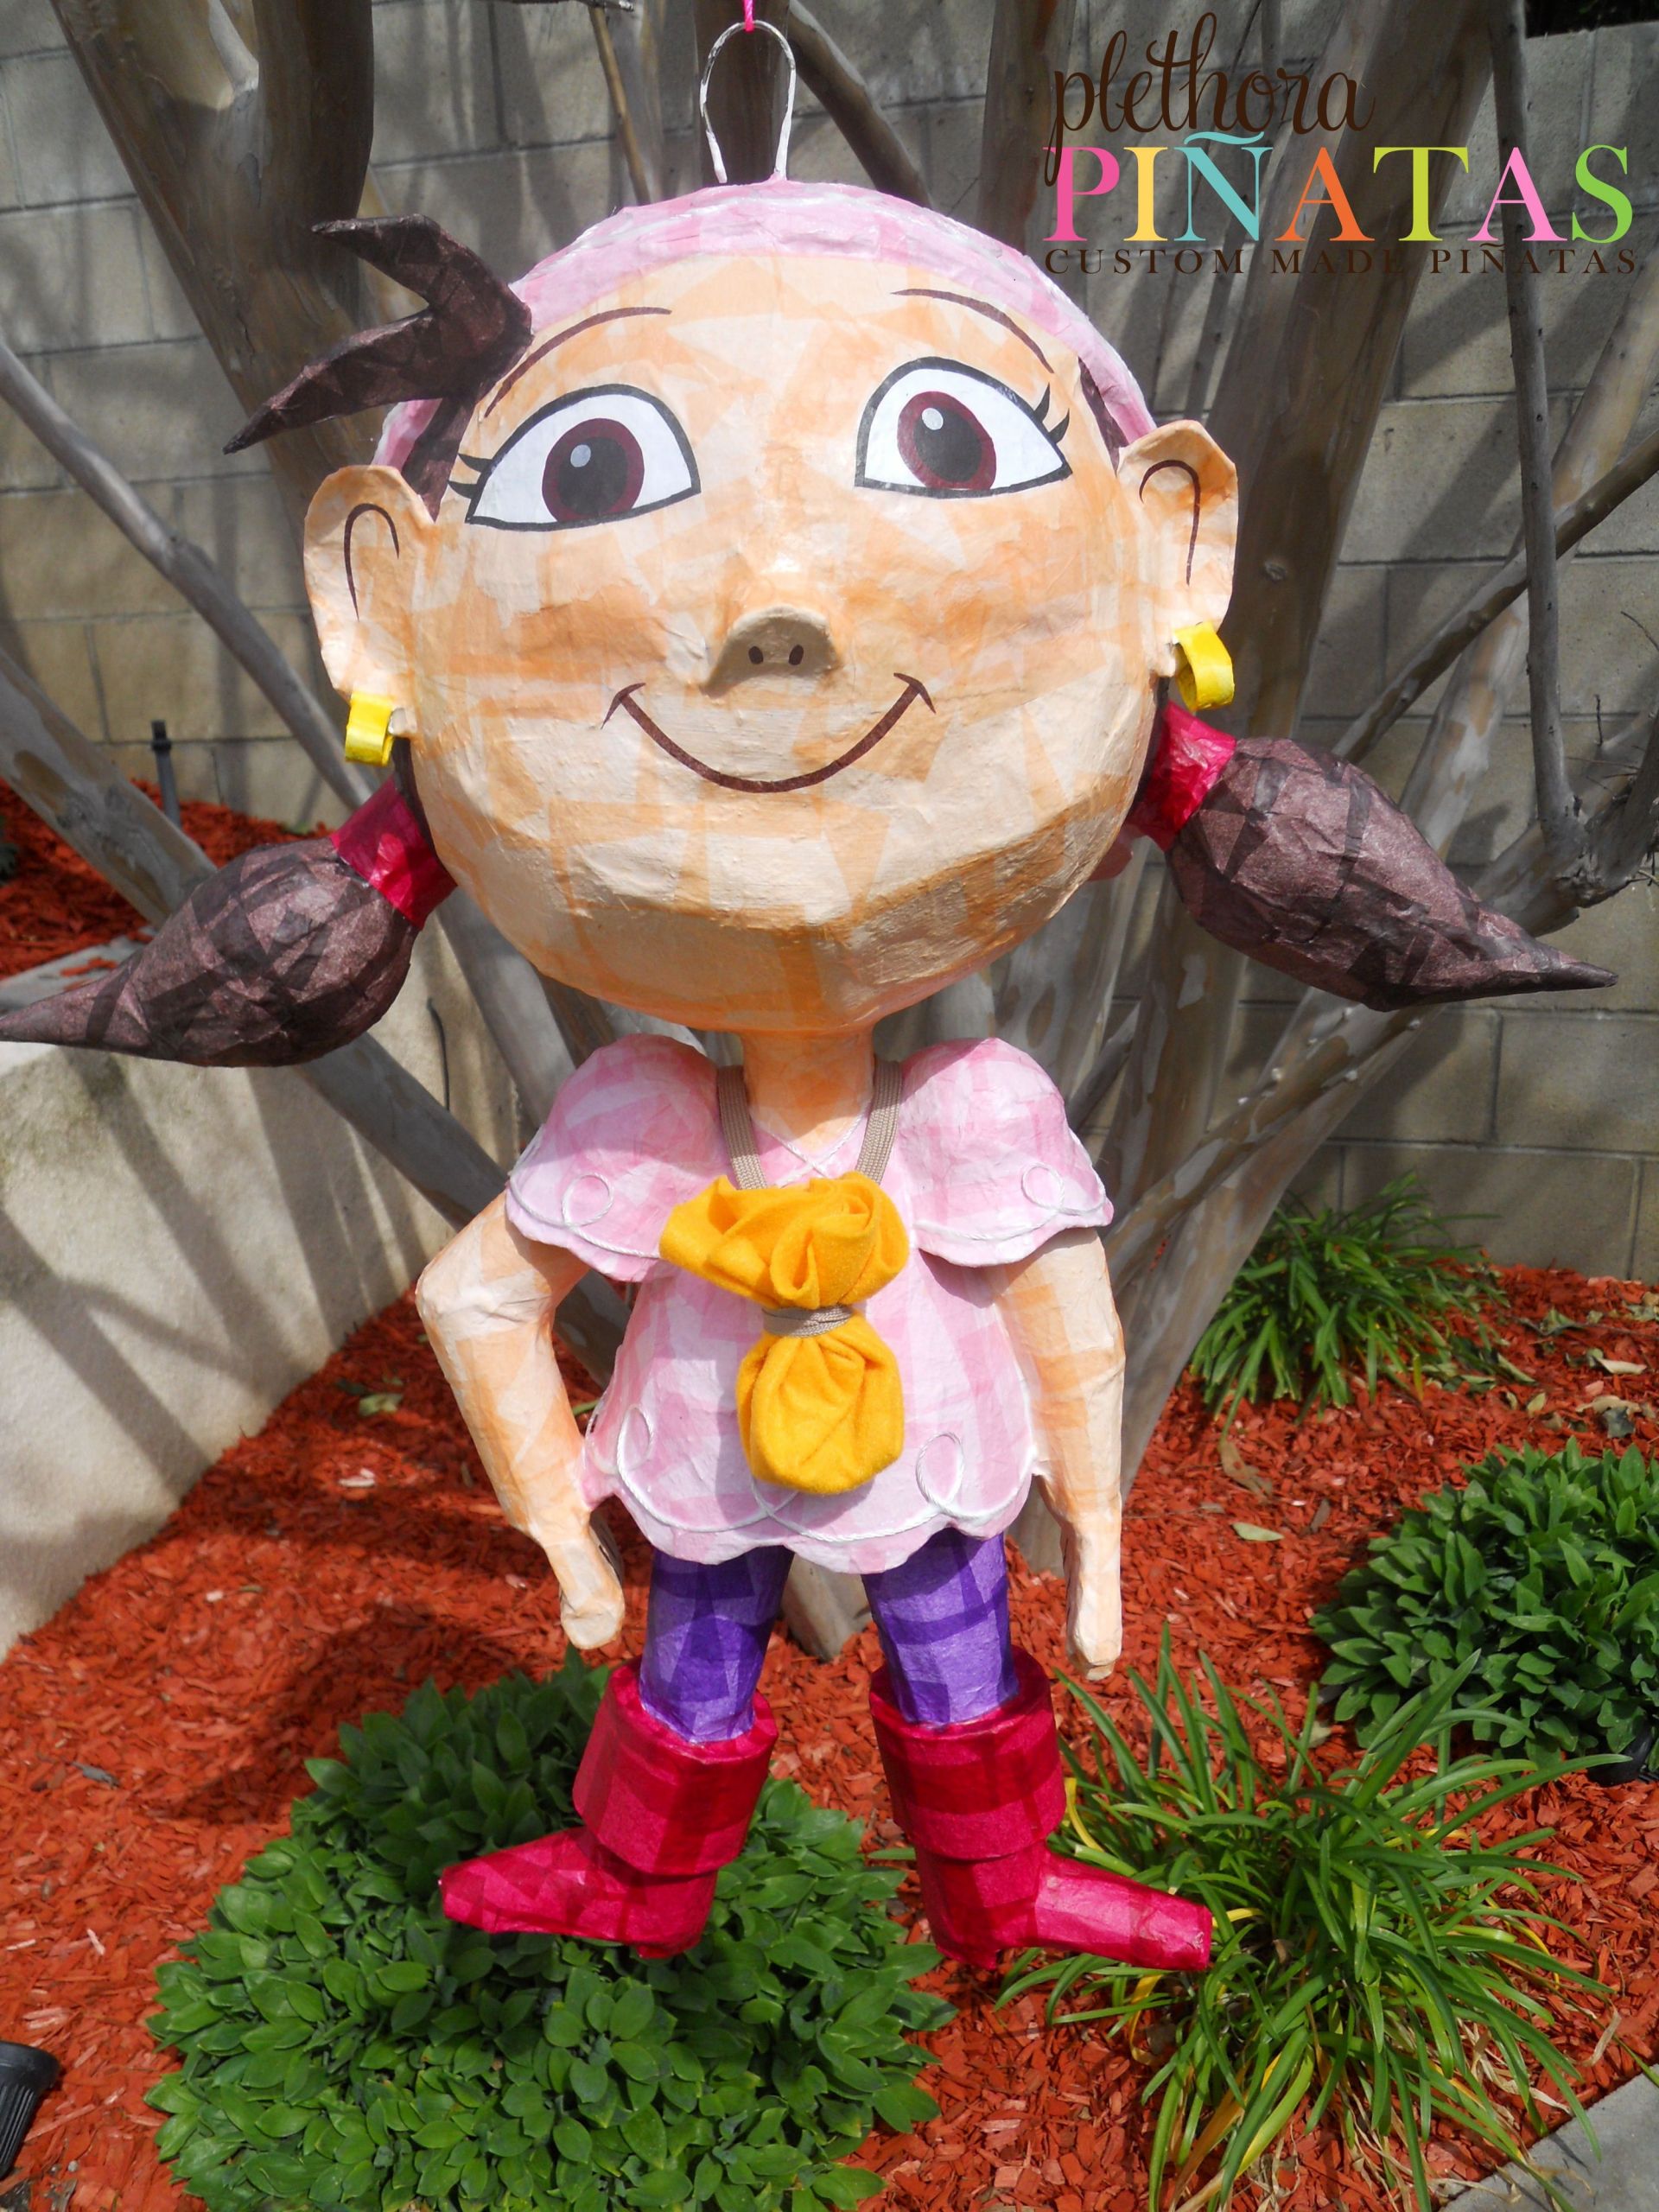 Izzy Birthday Party Supplies
 Izzy Pinata from Jake and The Neverland Pirates